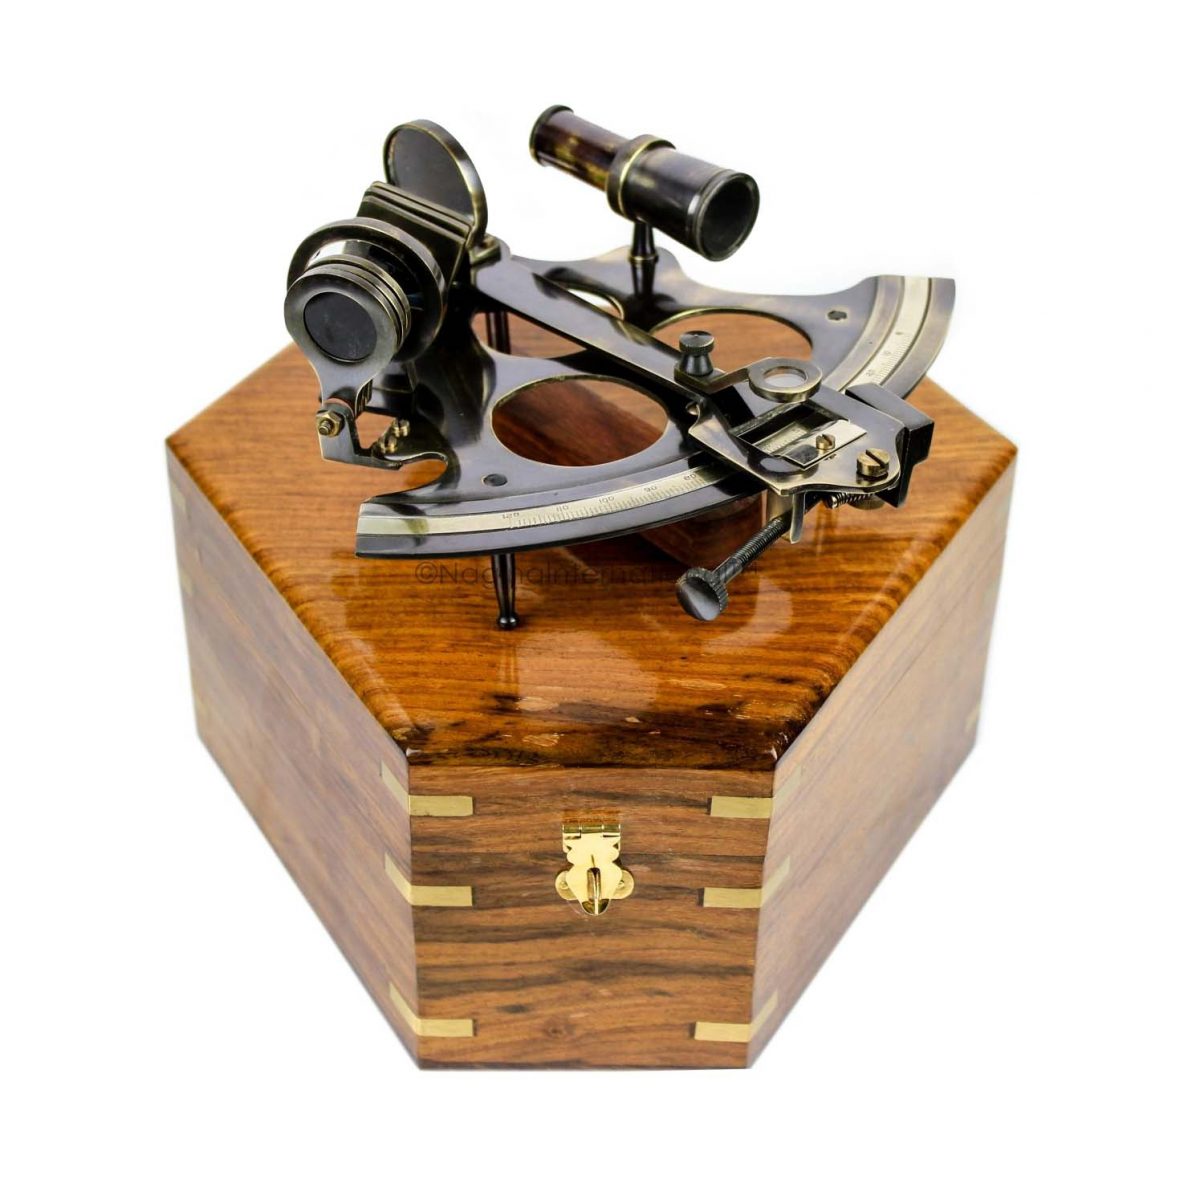 Nagina International Antique Nautical Brass Maritime Sextant with Premium Solid Hard Wood Crafted Box | Sailor's Pirate Decor Gift